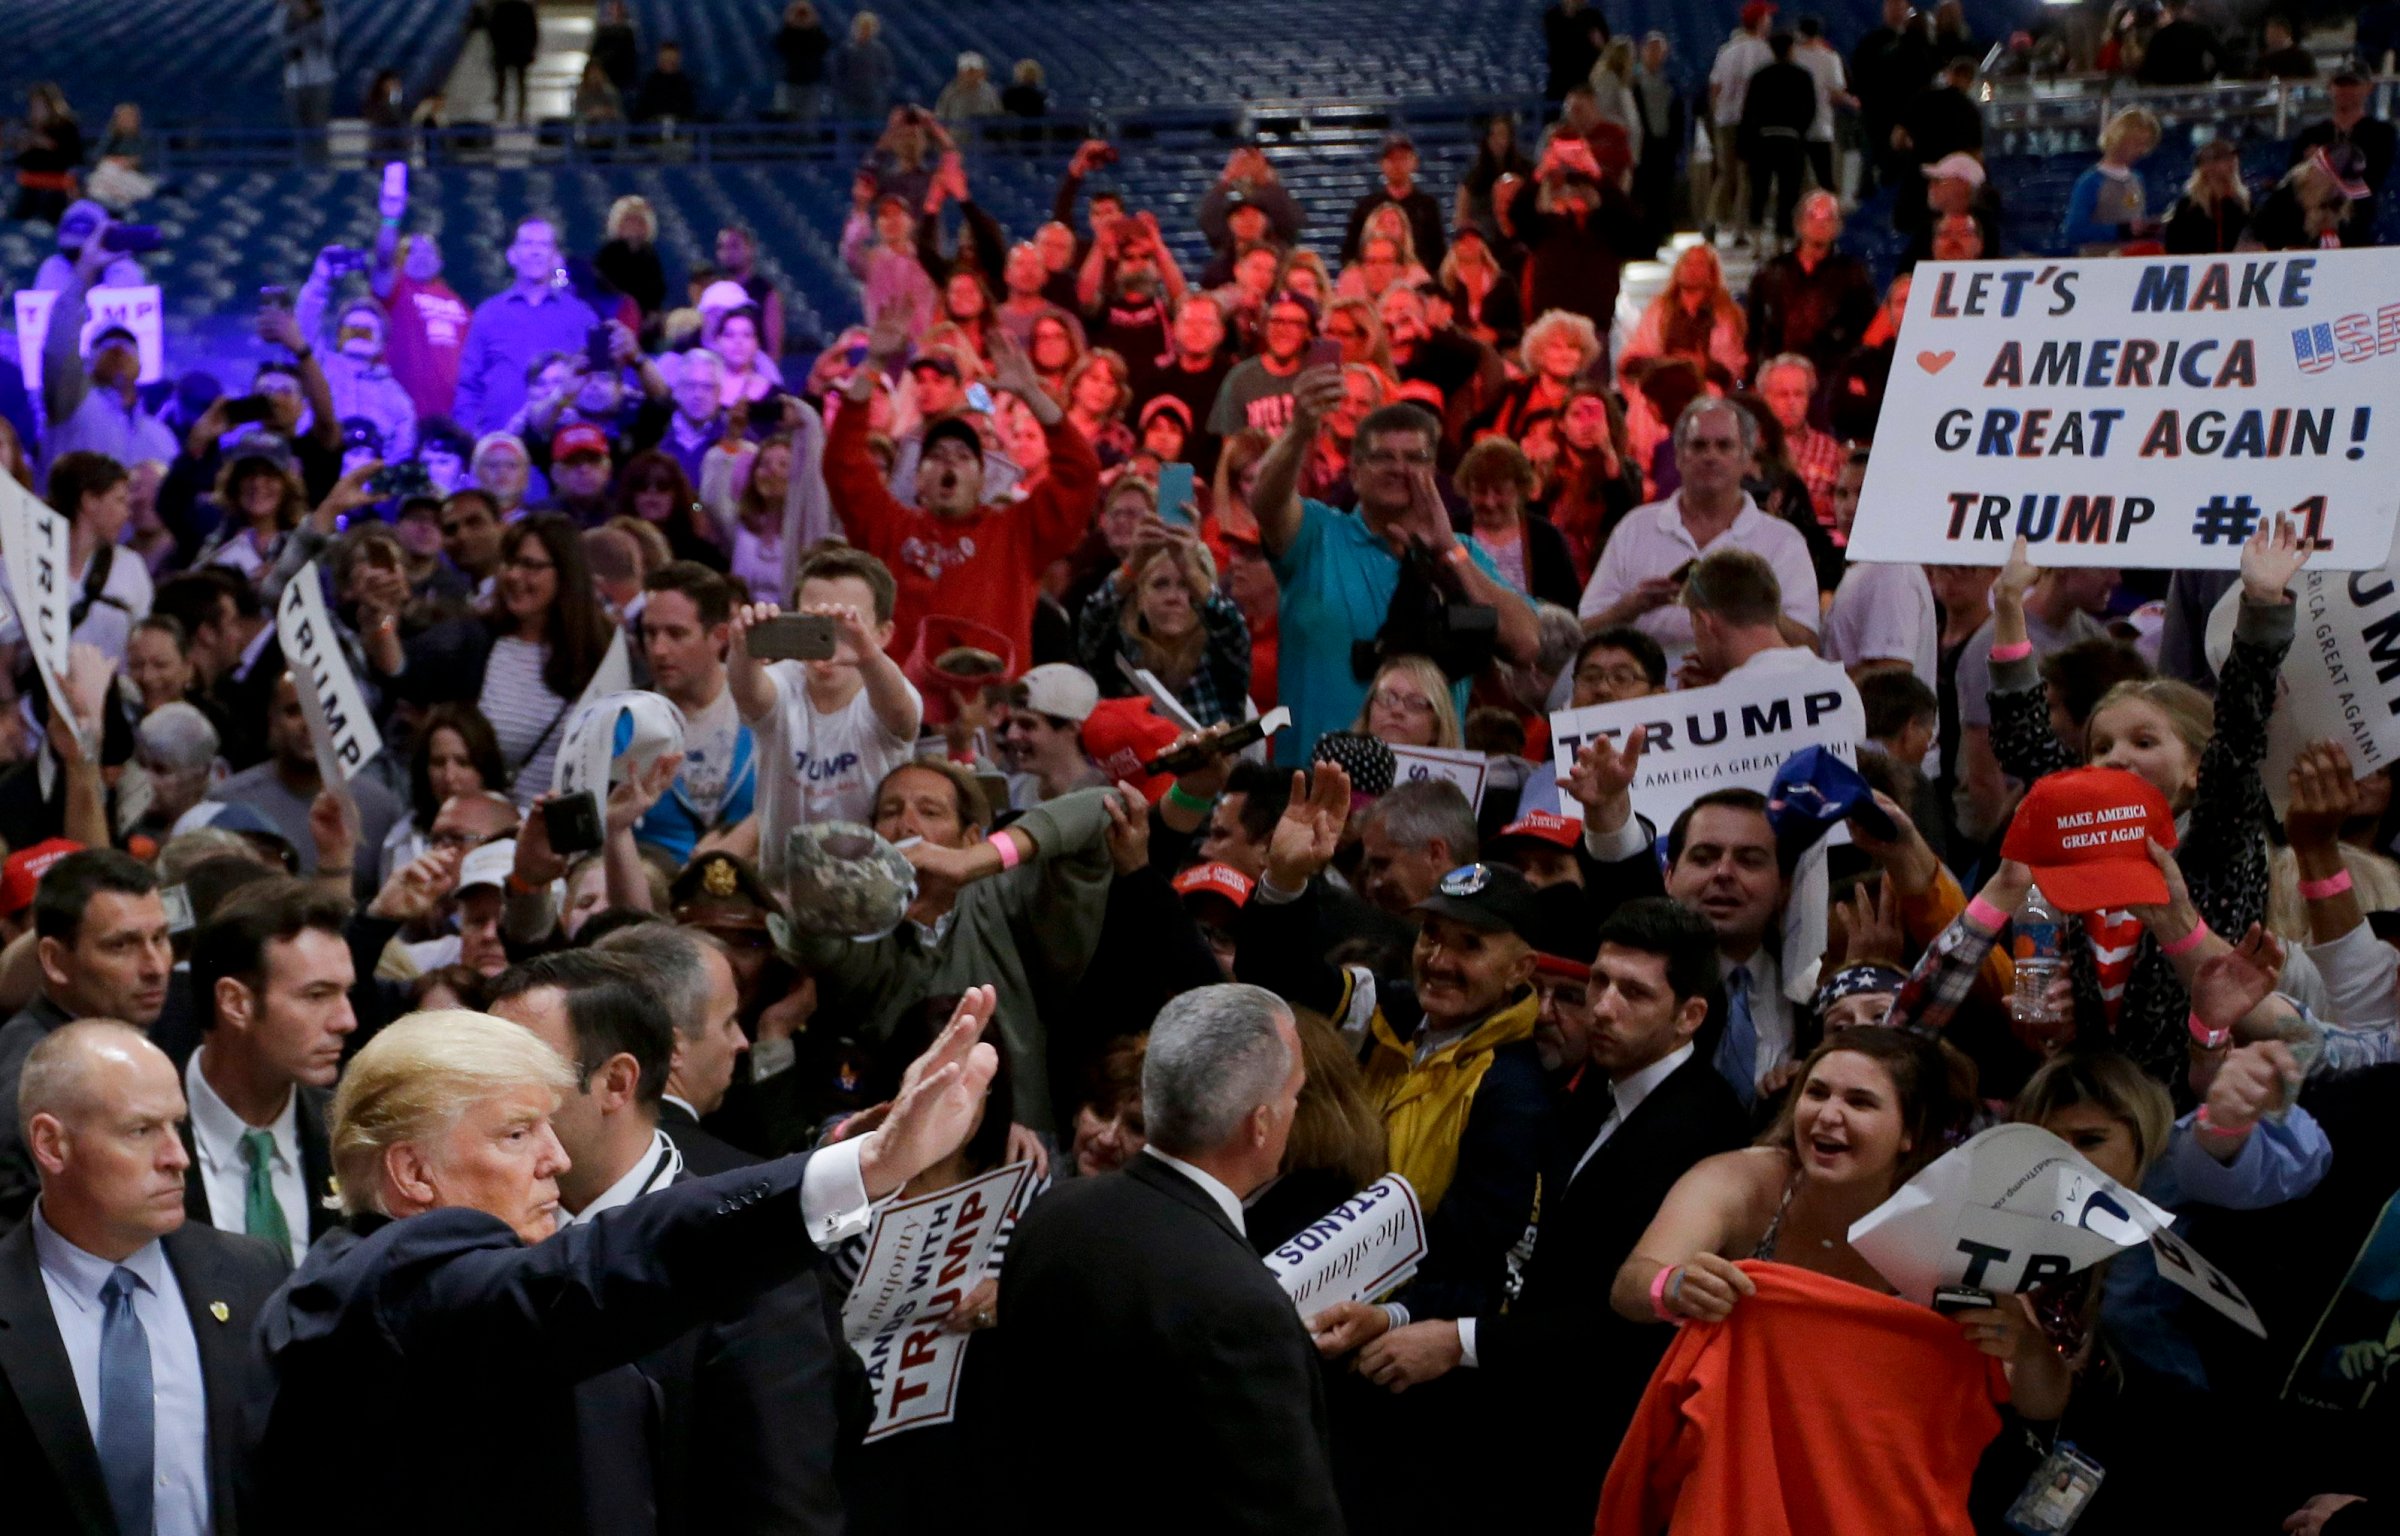 Republican presidential candidate Donald Trump greets supporters after a rally, Thursday, April 28, 2016 in Costa Mesa, Calif.